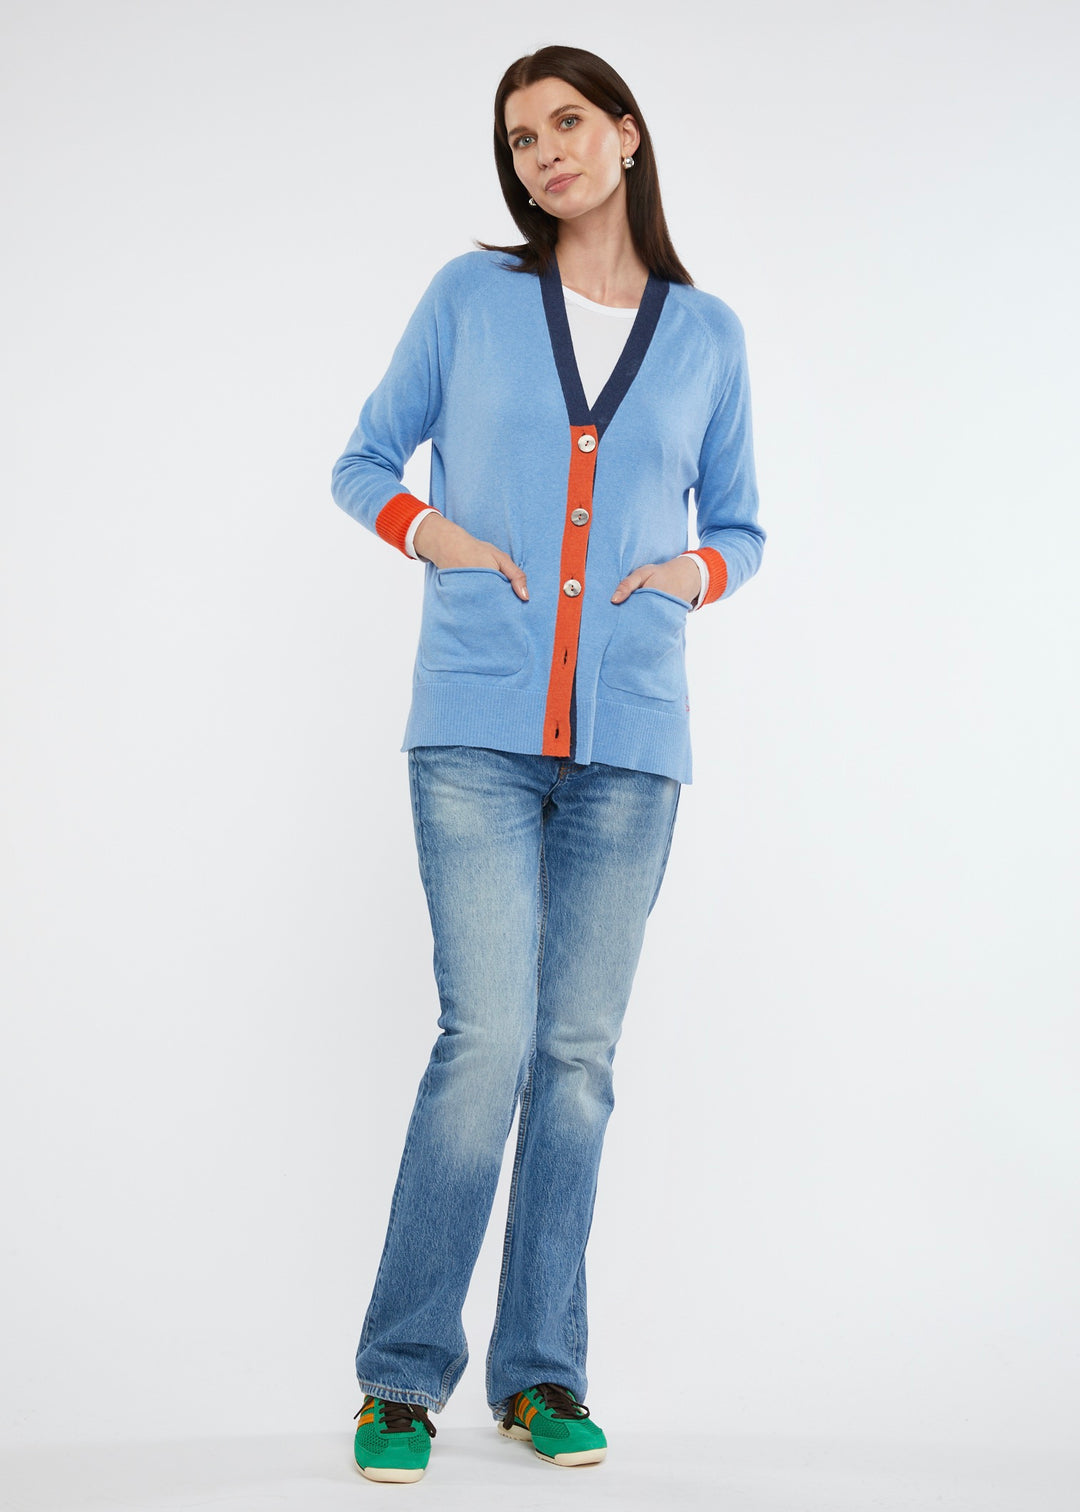 Zaket & Plover | College Cardi | Chambray Combo